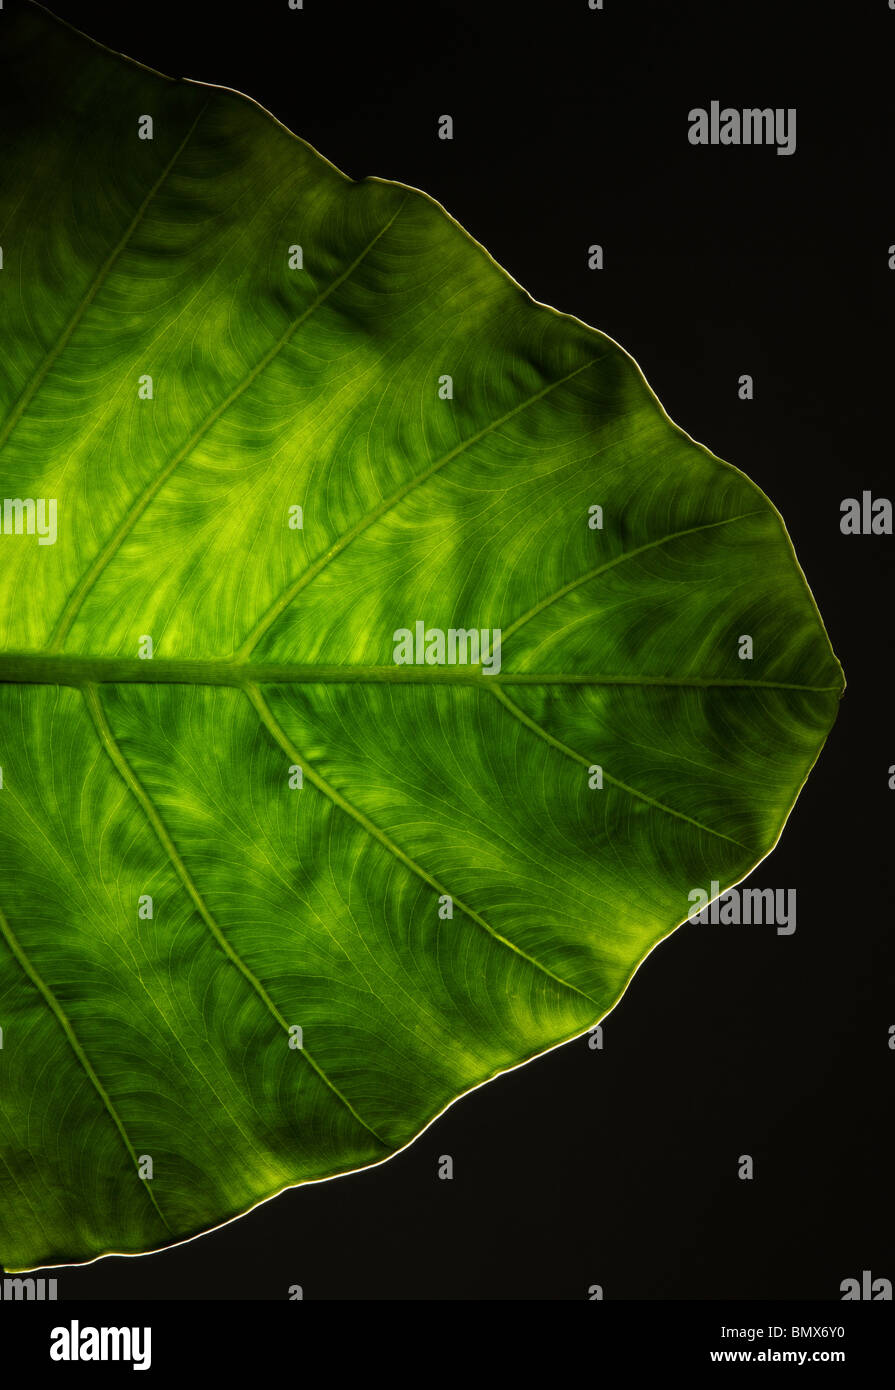 The end of a green plant leaf, black background Stock Photo